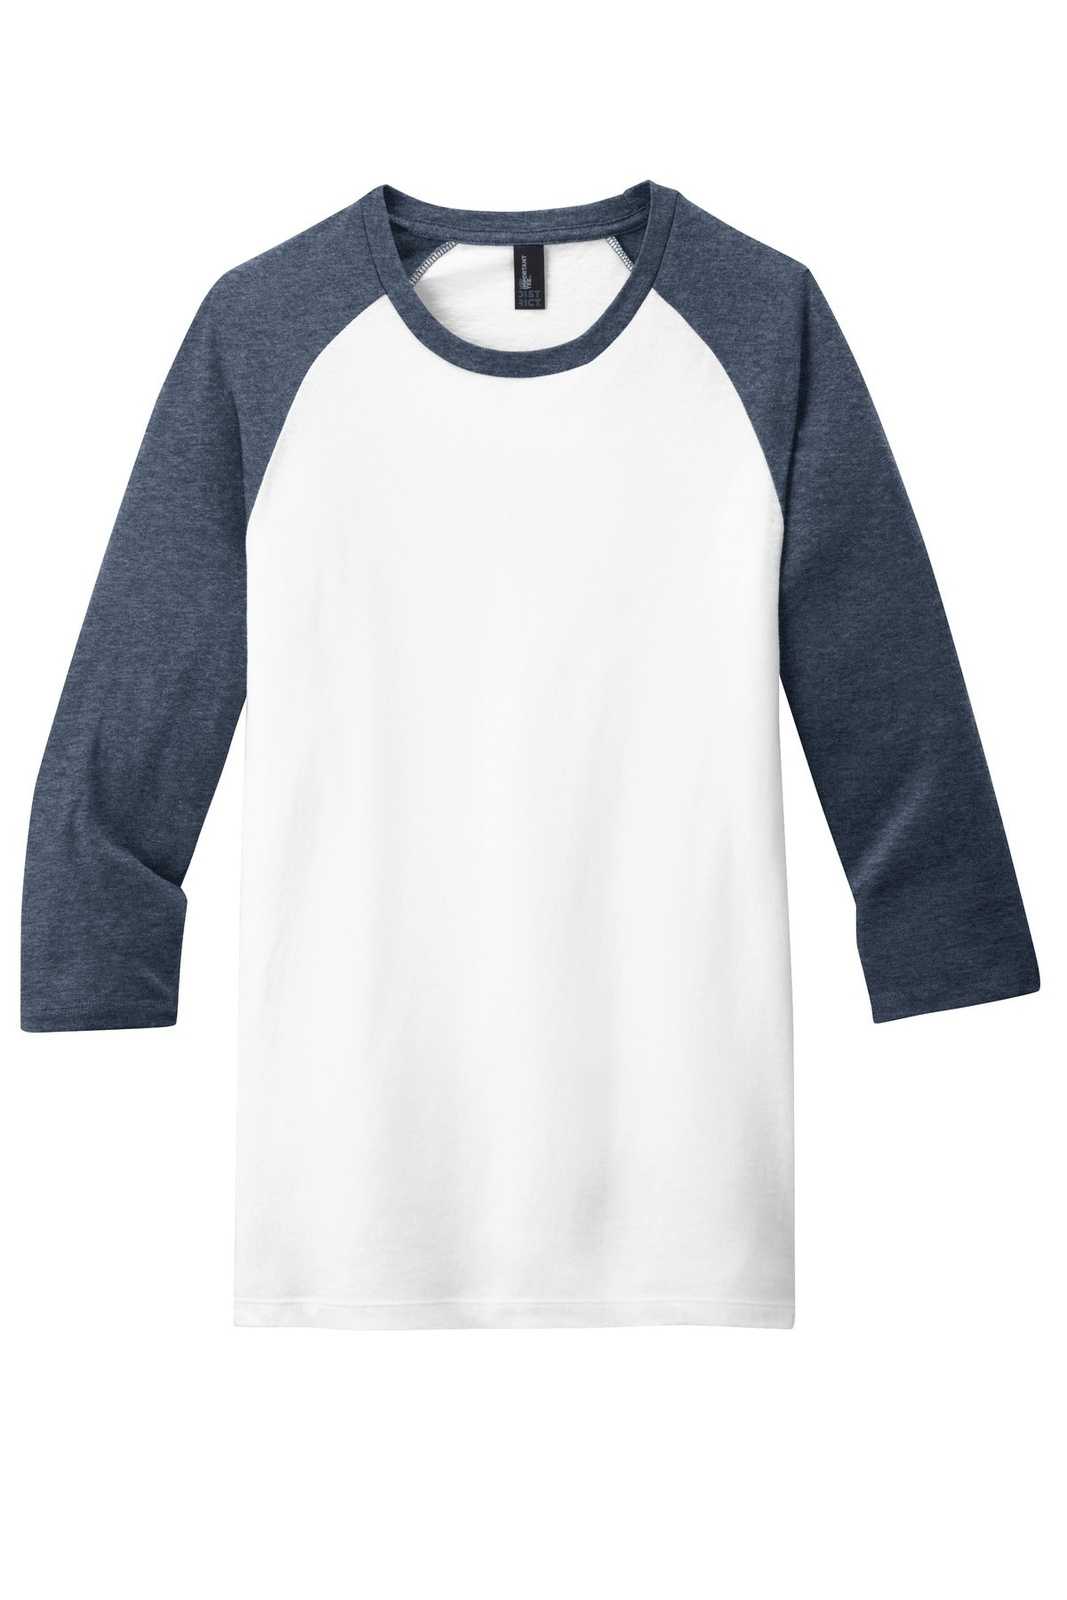 District DT6210 Very Important Tee 3/4-Sleeve Raglan - Heathered Navy White - HIT a Double - 5